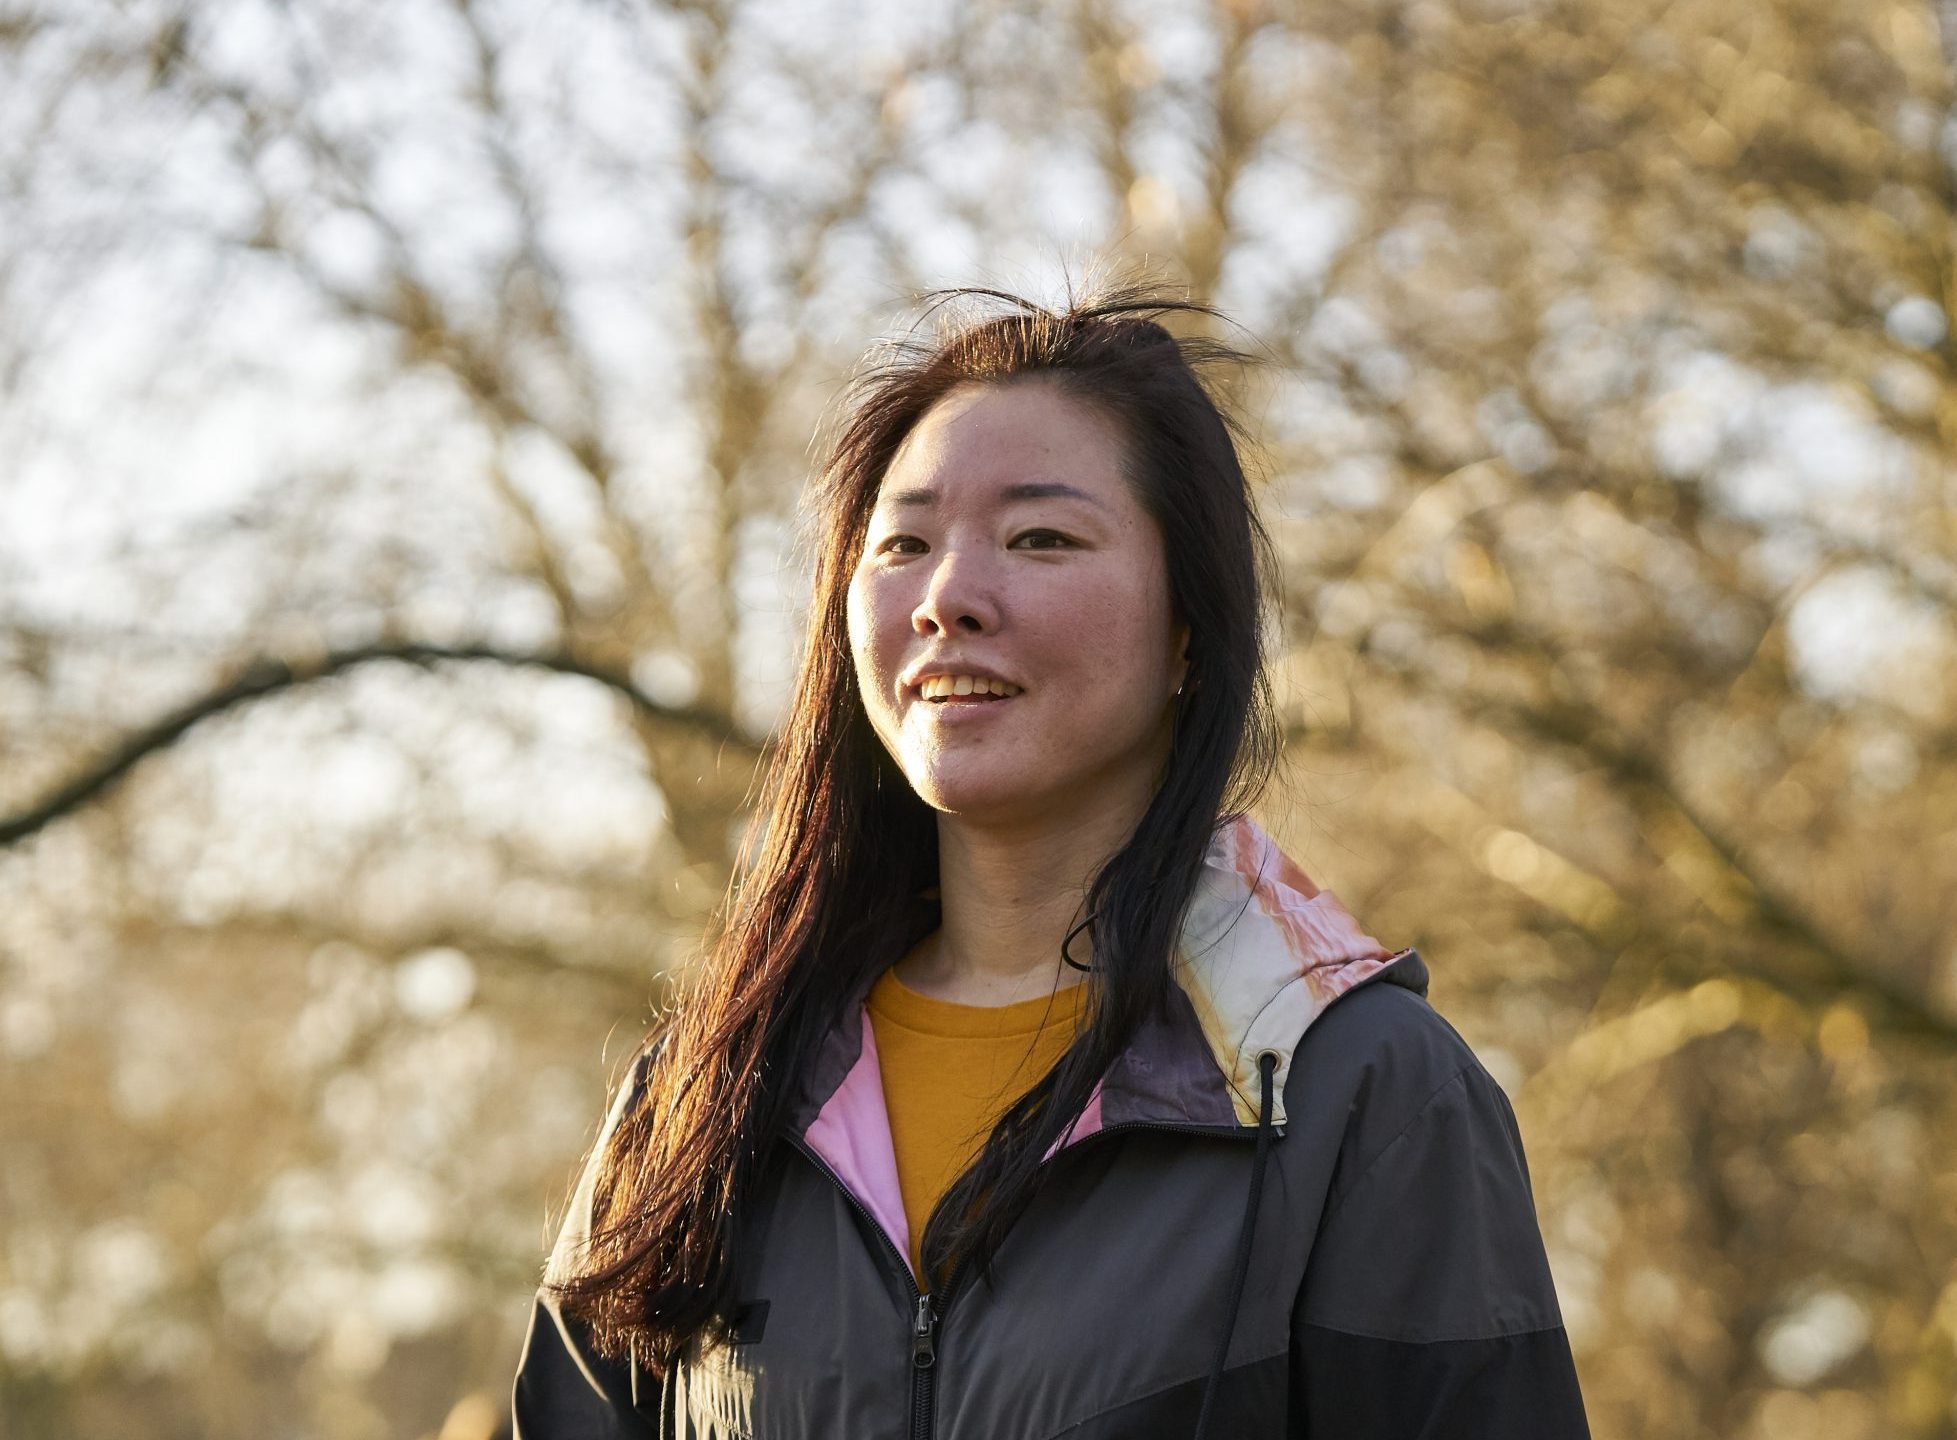 East Asian woman aged 25-30 with a flushed face after a run